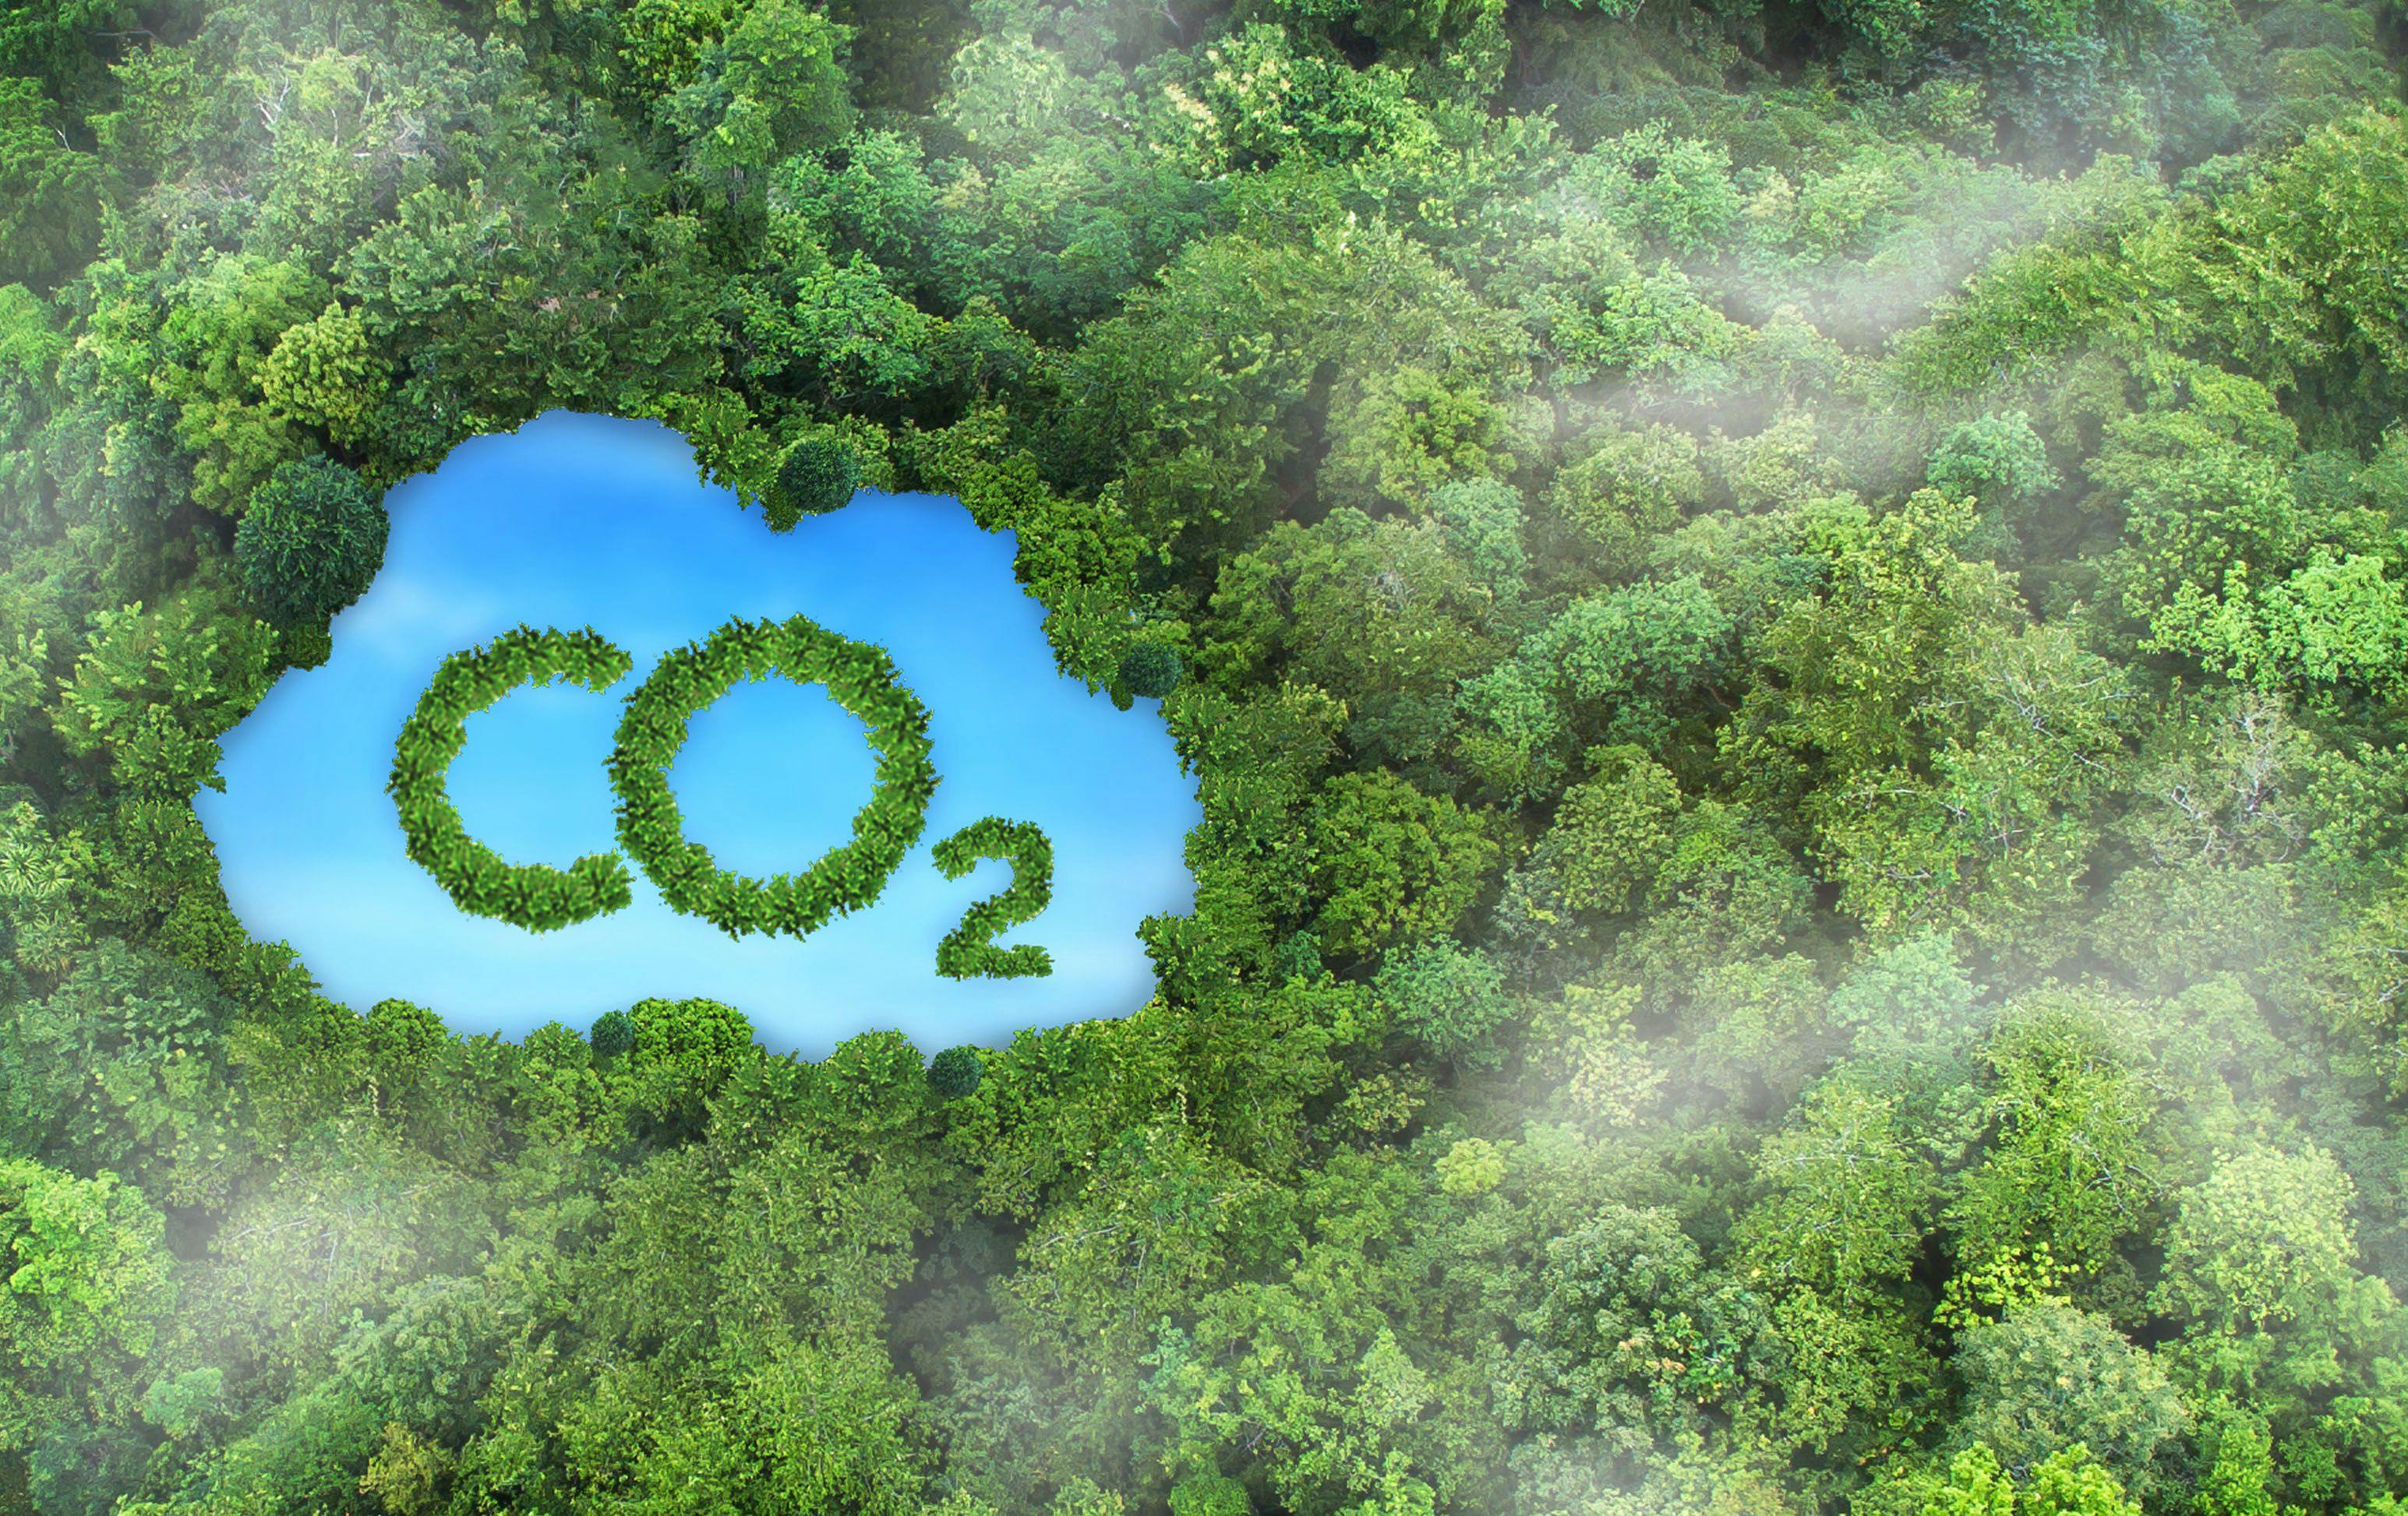 Concept depicting the issue of carbon dioxide emissions and its impact on nature in the form of a pond in the shape of a co2 symbol located in a lush forest | Image Credit: © Gan - stock.adobe.com